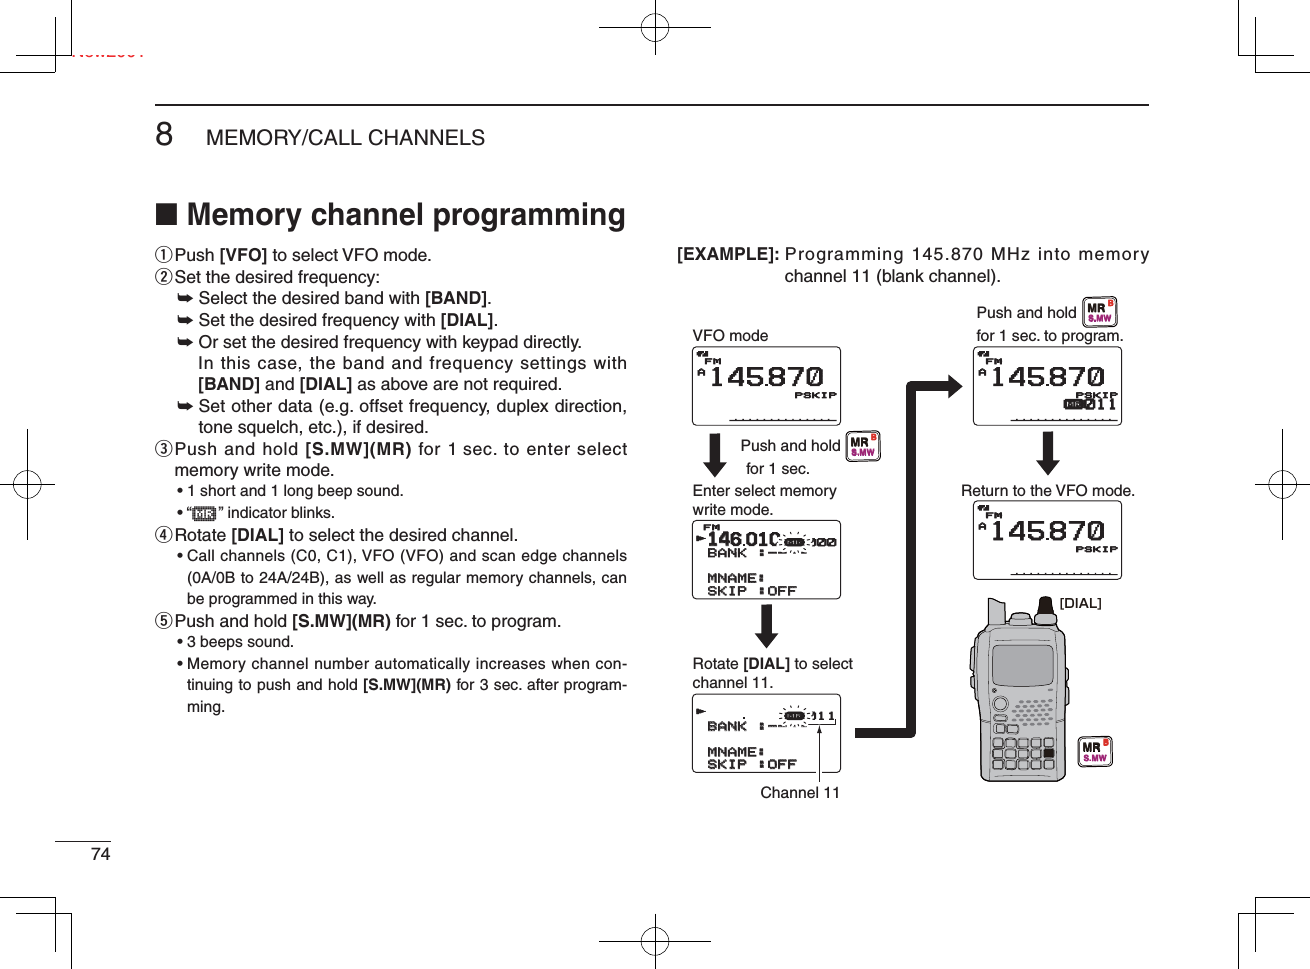 Ne748MEMORY/CALL CHANNELSNew2001■ Memory channel programmingq Push  [VFO] to select VFO mode.w Set the desired frequency:➥ Select the desired band with [BAND].➥ Set the desired frequency with [DIAL].➥ Or set the desired frequency with keypad directly.  In this case, the band and frequency settings with [BAND] and [DIAL] as above are not required.➥  Set other data (e.g. offset frequency, duplex direction, tone squelch, etc.), if desired.e  Push and hold [S.MW](MR) for 1 sec. to enter select memory write mode.• 1 short and 1 long beep sound.• “μ    ” indicator blinks.r Rotate  [DIAL] to select the desired channel.•  Call channels (C0, C1), VFO (VFO) and scan edge channels (0A/0B to 24A/24B), as well as regular memory channels, can be programmed in this way.t Push and hold [S.MW](MR) for 1 sec. to program.• 3 beeps sound.•  Memory channel number automatically increases when con-tinuing to push and hold [S.MW](MR) for 3 sec. after program-ming.[EXAMPLE]:  Programming 145.870 MHz into memory channel 11 (blank channel).14146010BANKBANK :----:----    MNAME:MNAME:SKIPSKIP :OFF:OFFFMrμ000BANKBANK :----:----    MNAME:MNAME:SKIPSKIP :OFF:OFFrμ011AFMFM145870PSKIPPSKIPAFM145870PSKIPPSKIPAμFM145870PSKIPPSKIP011[DIAL]MRS.MWBMRS.MWBMRS.MWBVFO modeEnter select memory write mode.Rotate [DIAL] to selectchannel 11.Push and holdfor 1 sec.Channel 11Push and holdfor 1 sec. to program.Return to the VFO mode.